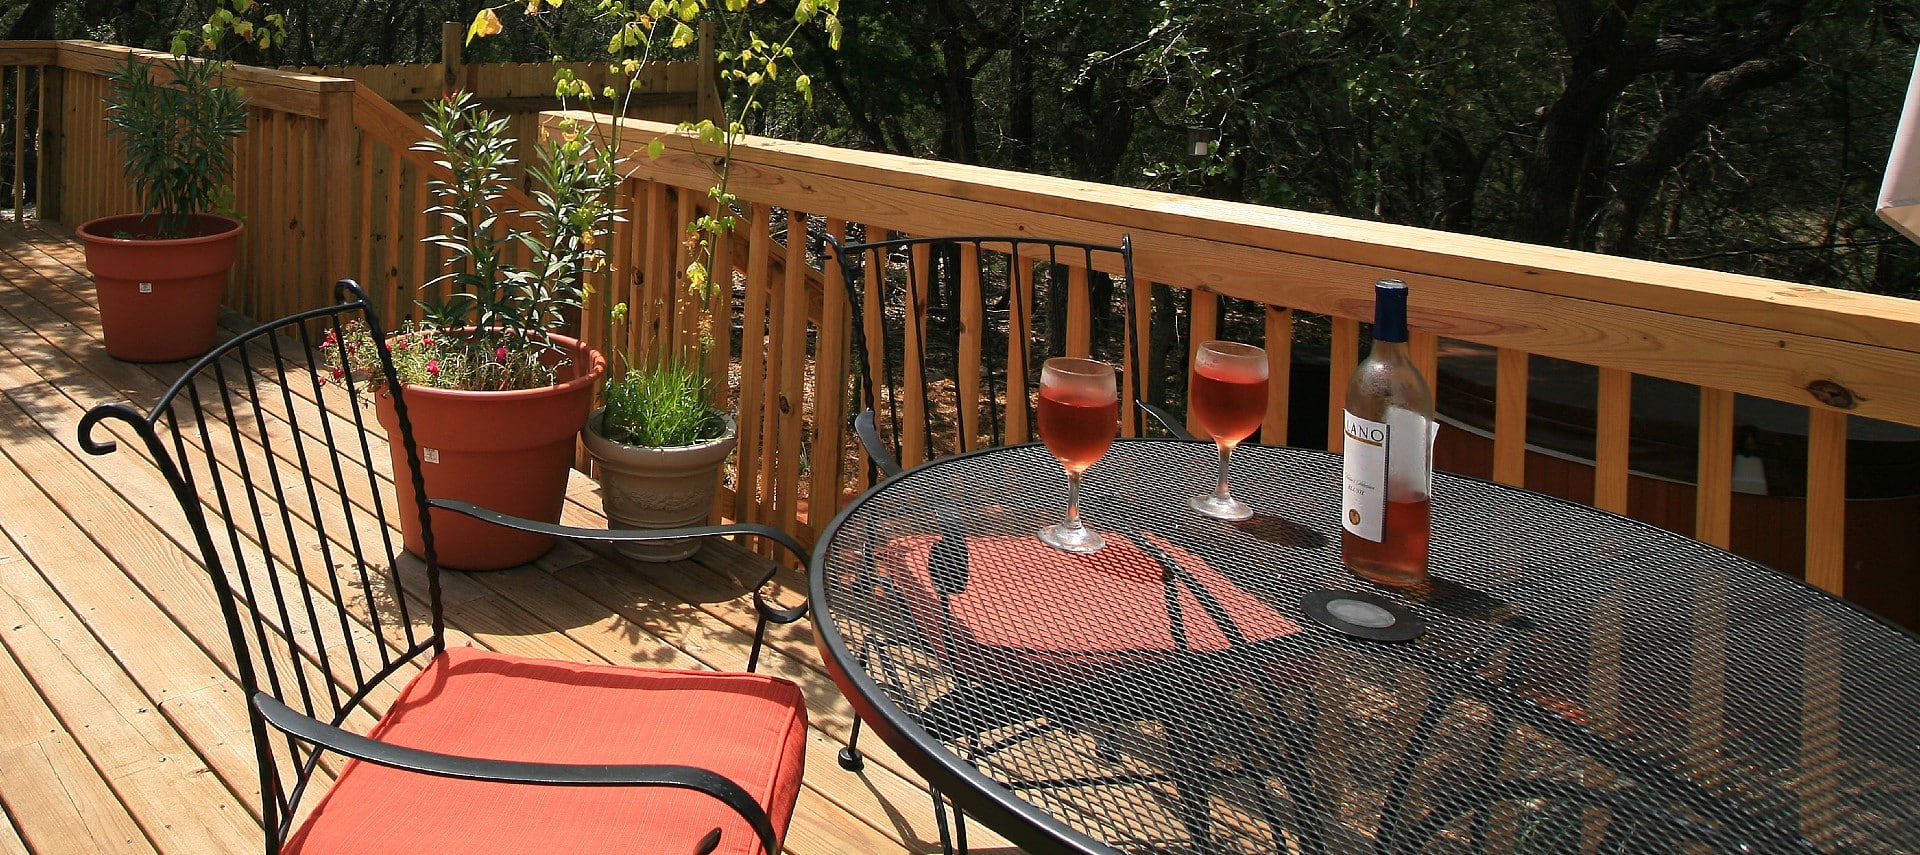 A wrought iron patio table with two chairs, bottle of wine and two glasses near potted plants on a deck